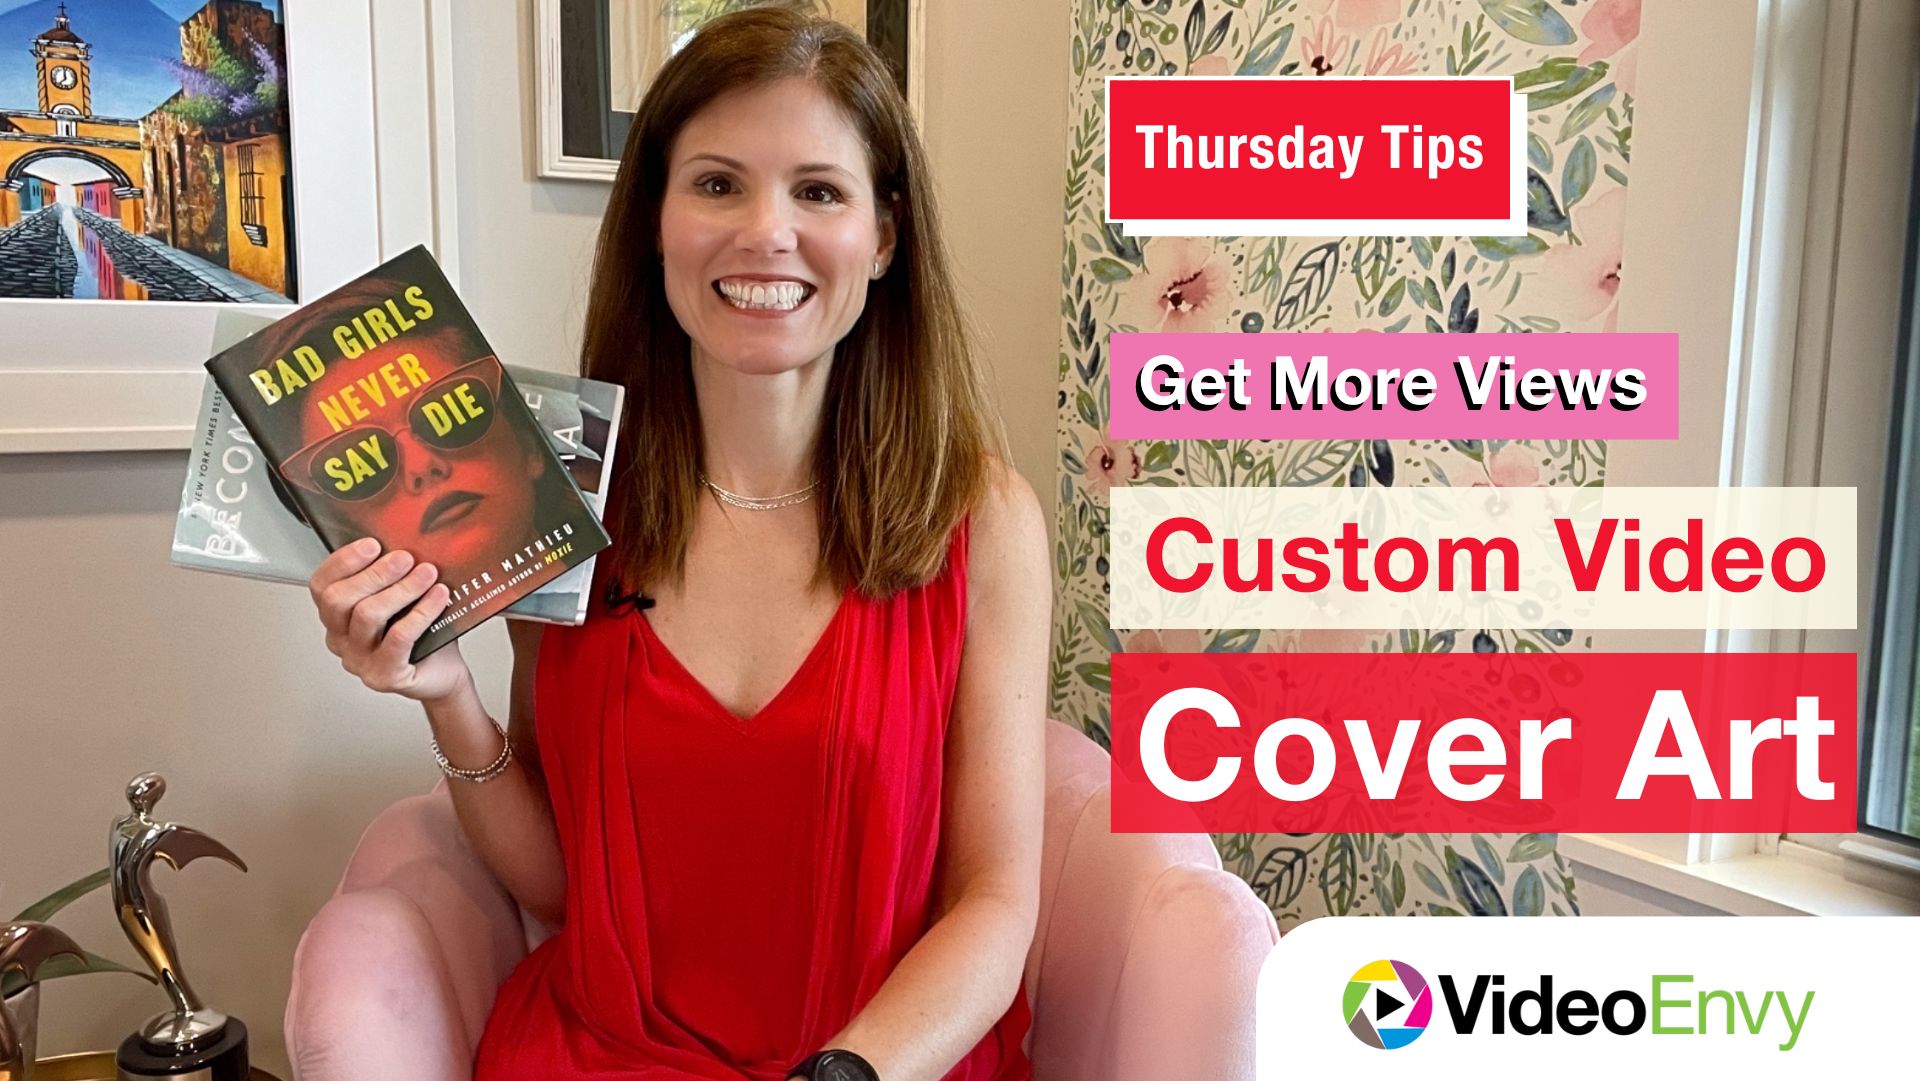 Thursday Tips: Get More Views with Custom Video Cover Art